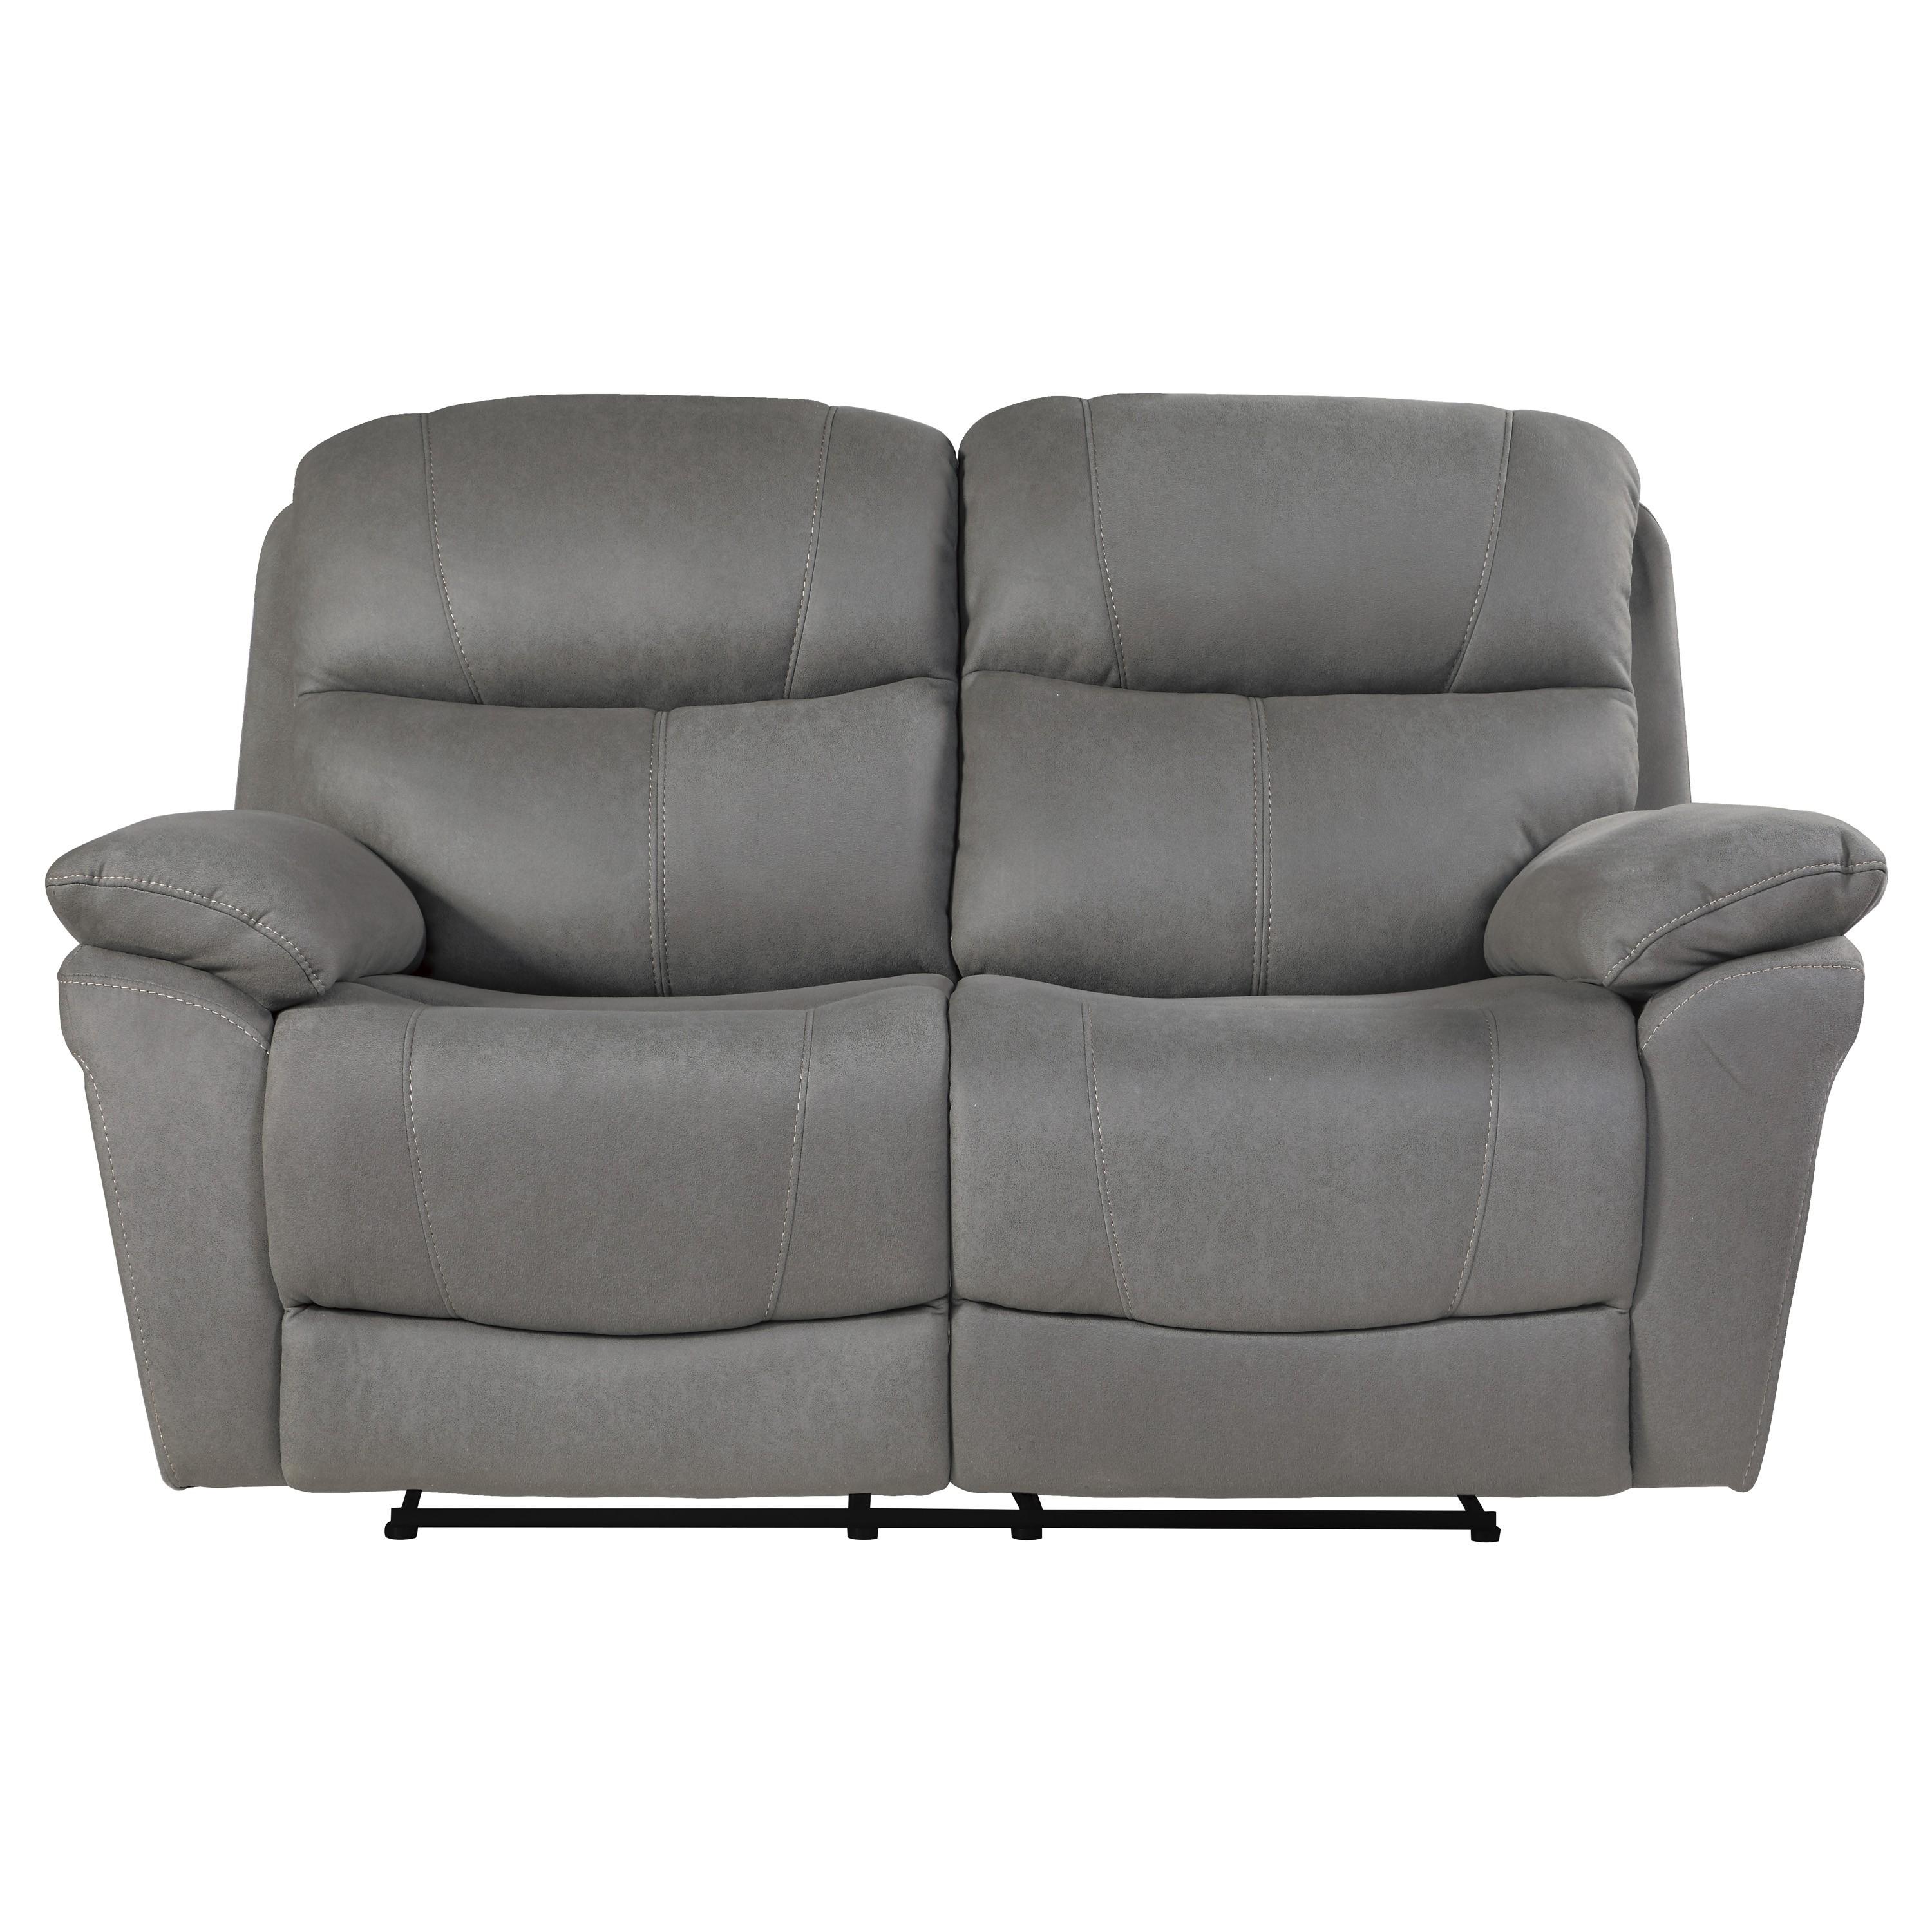 Transitional Reclining Loveseat 9580GY-2 Longvale 9580GY-2 in Gray Microfiber